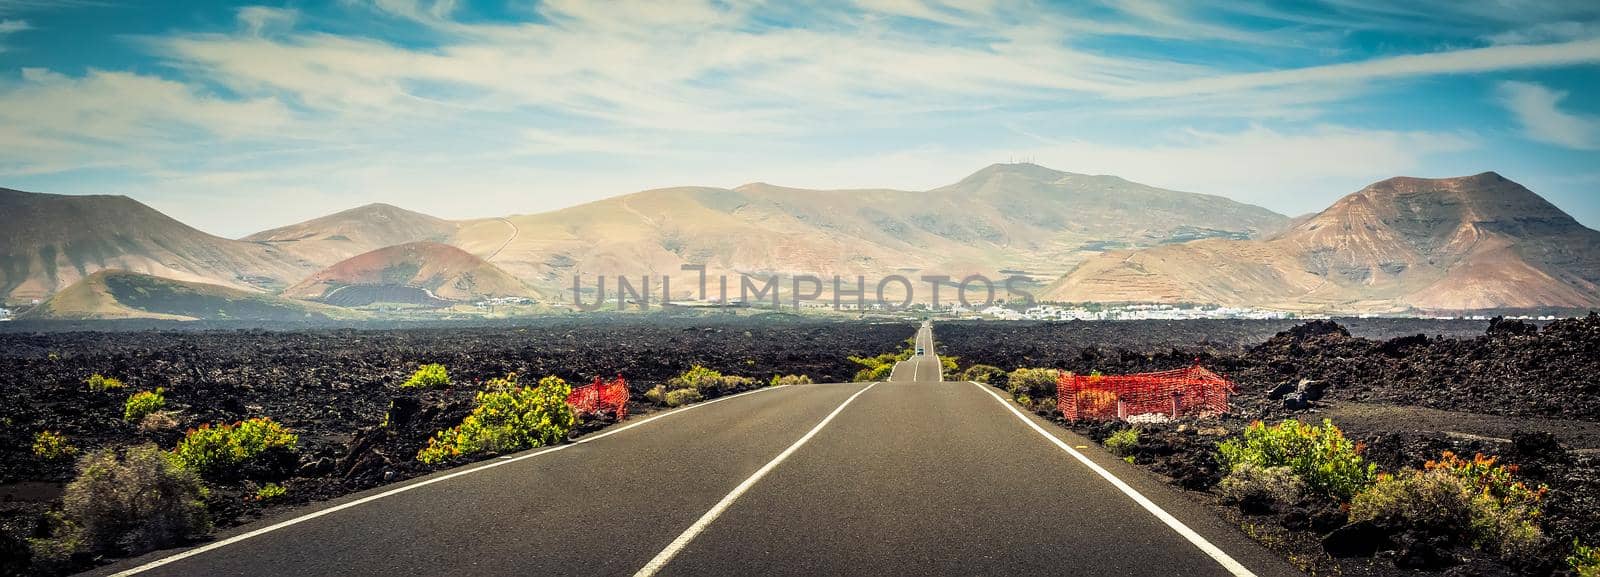 magnificent panorama of road leading to mountains